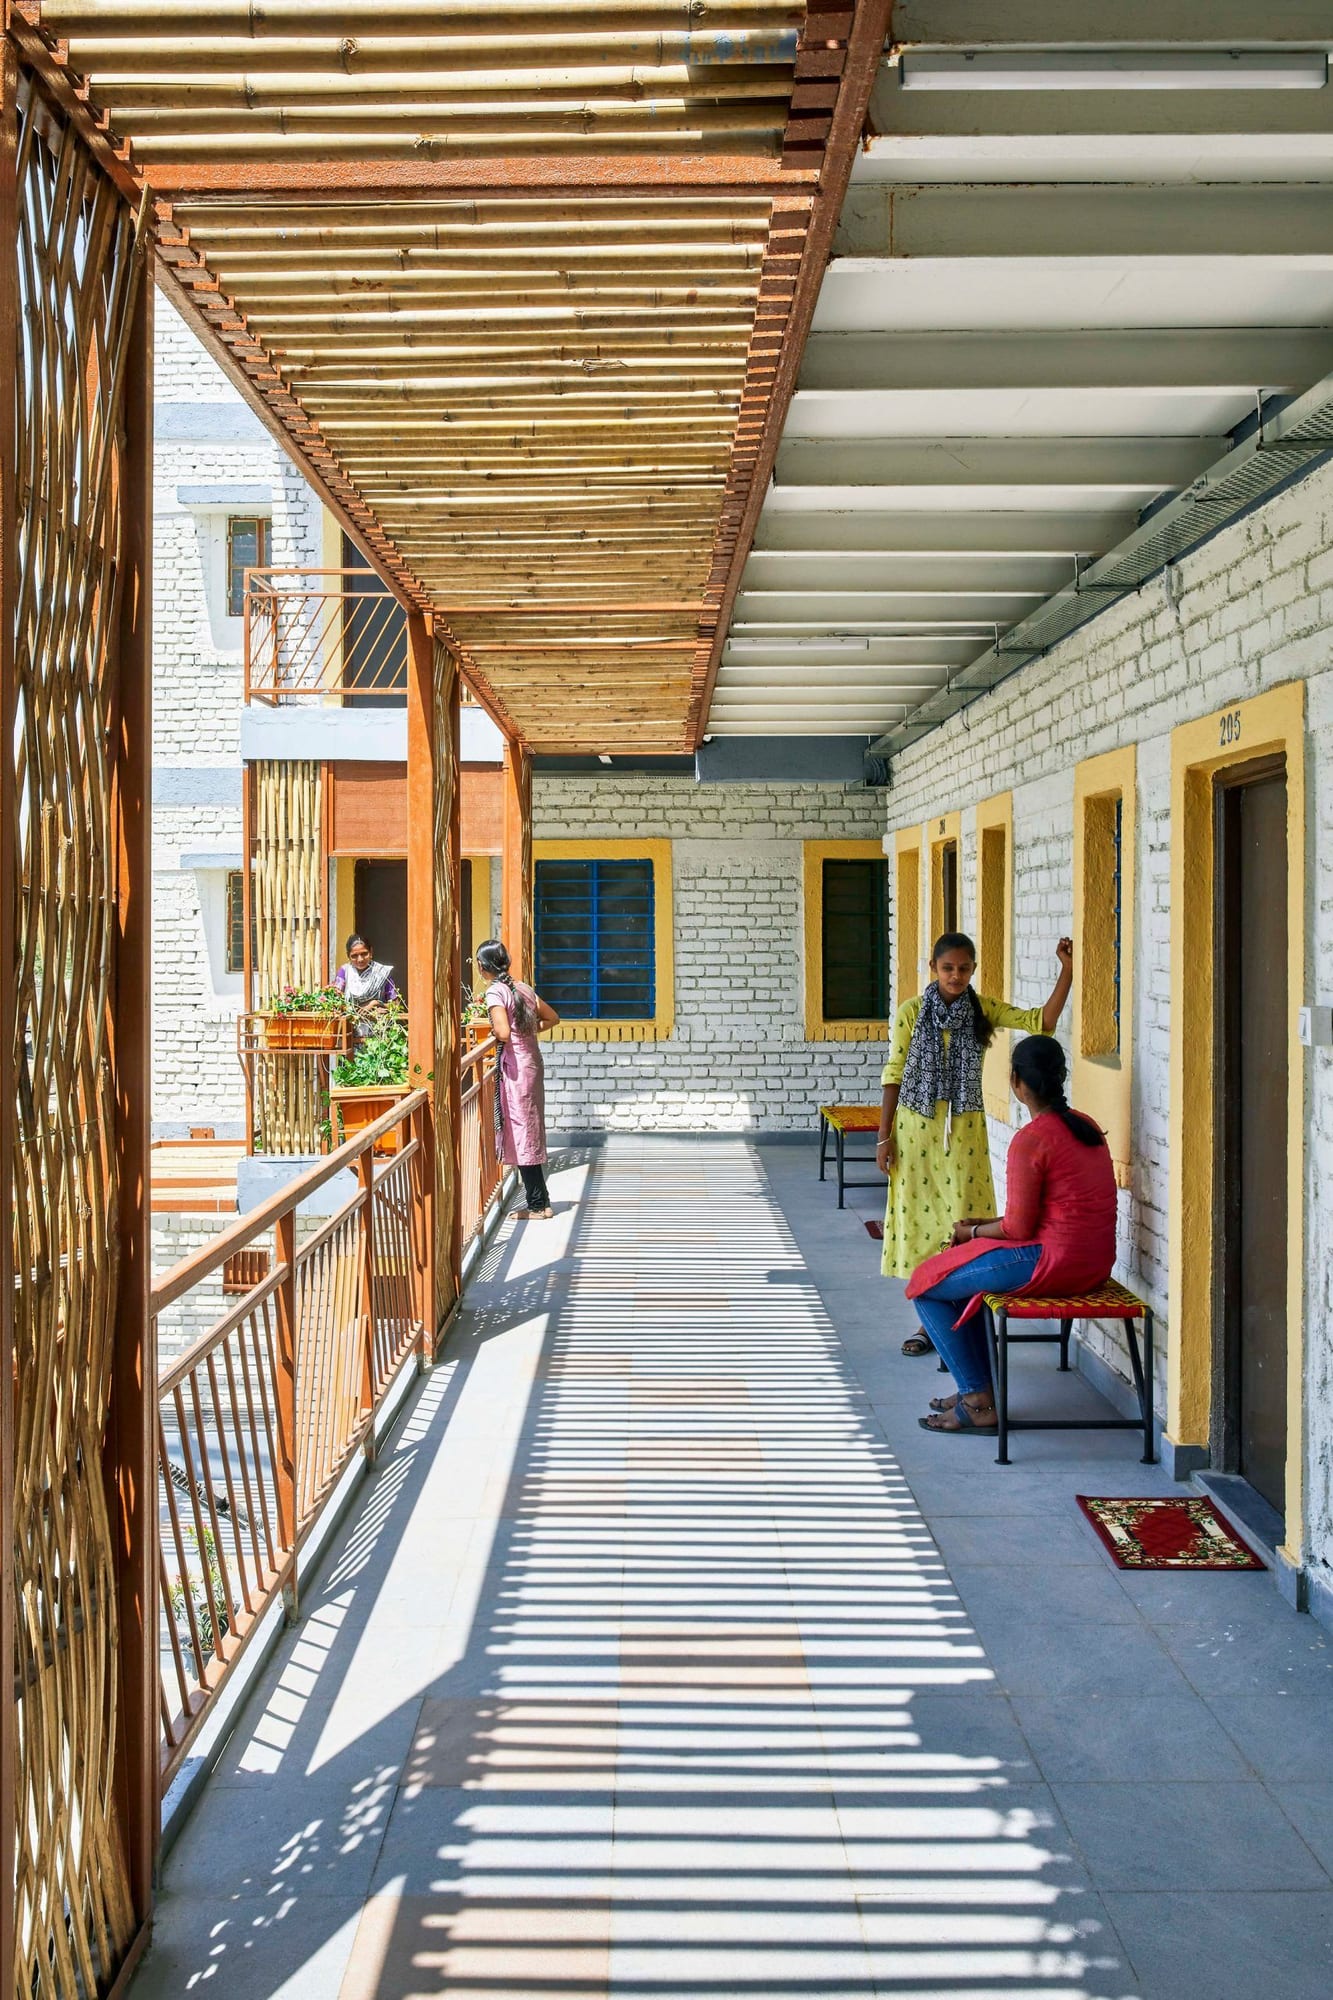 Residents mingle and look out over the surrounding area from the upper walkway of a CDA-designed affordable housing unit.